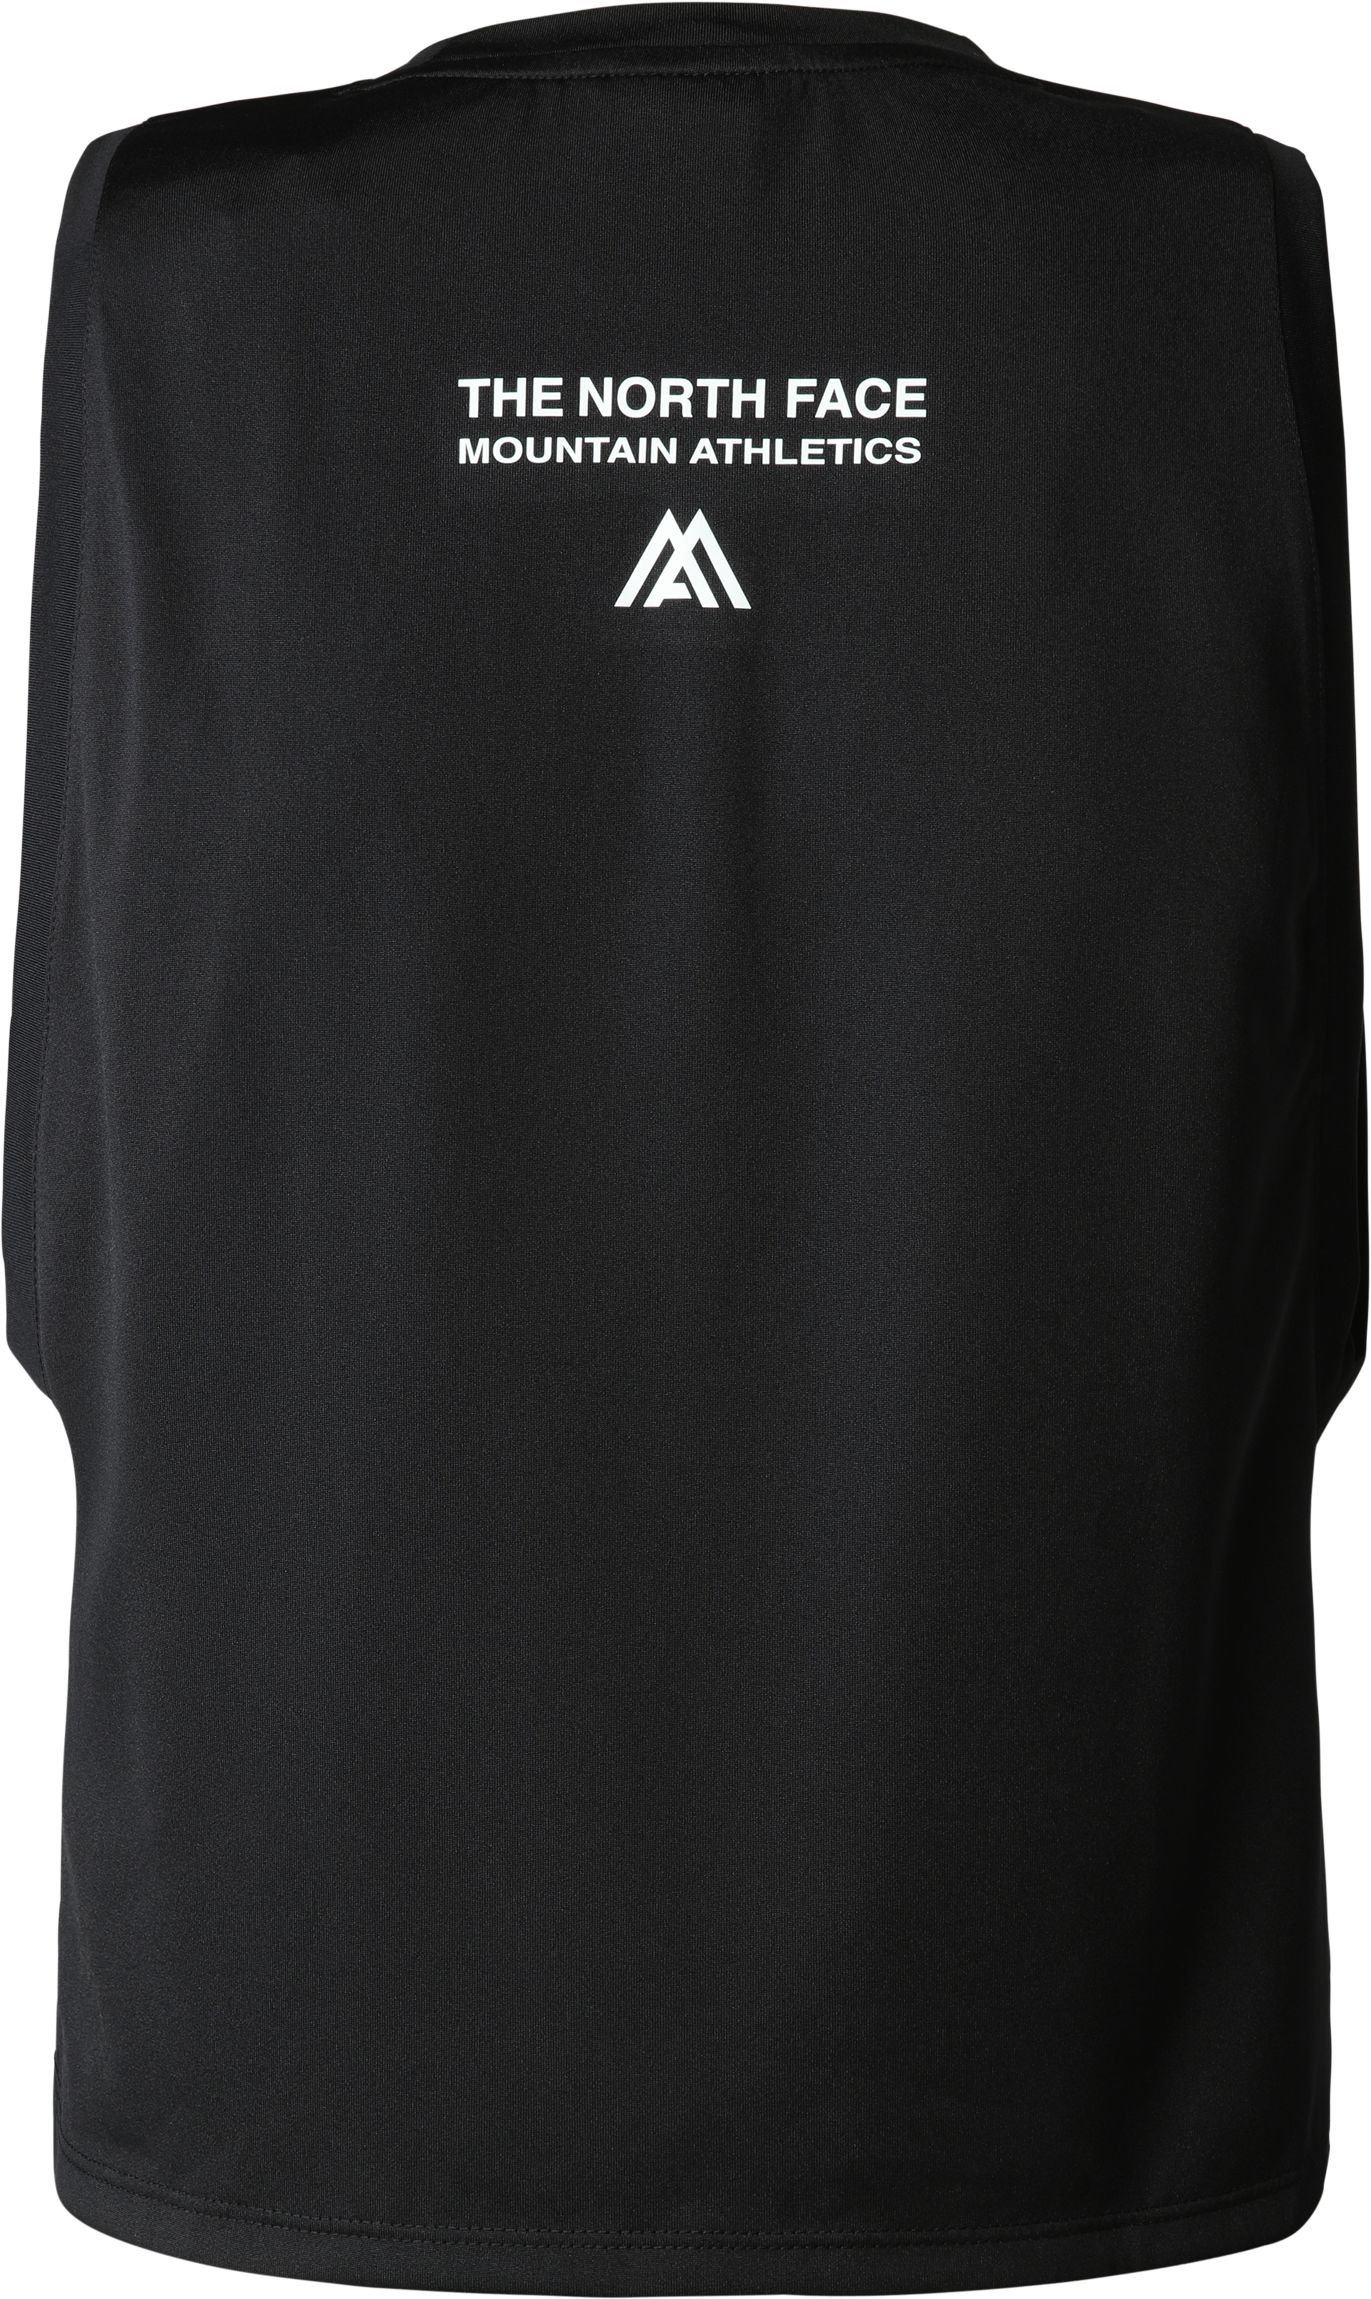 THE NORTH FACE, W MA S/S CROP TANK